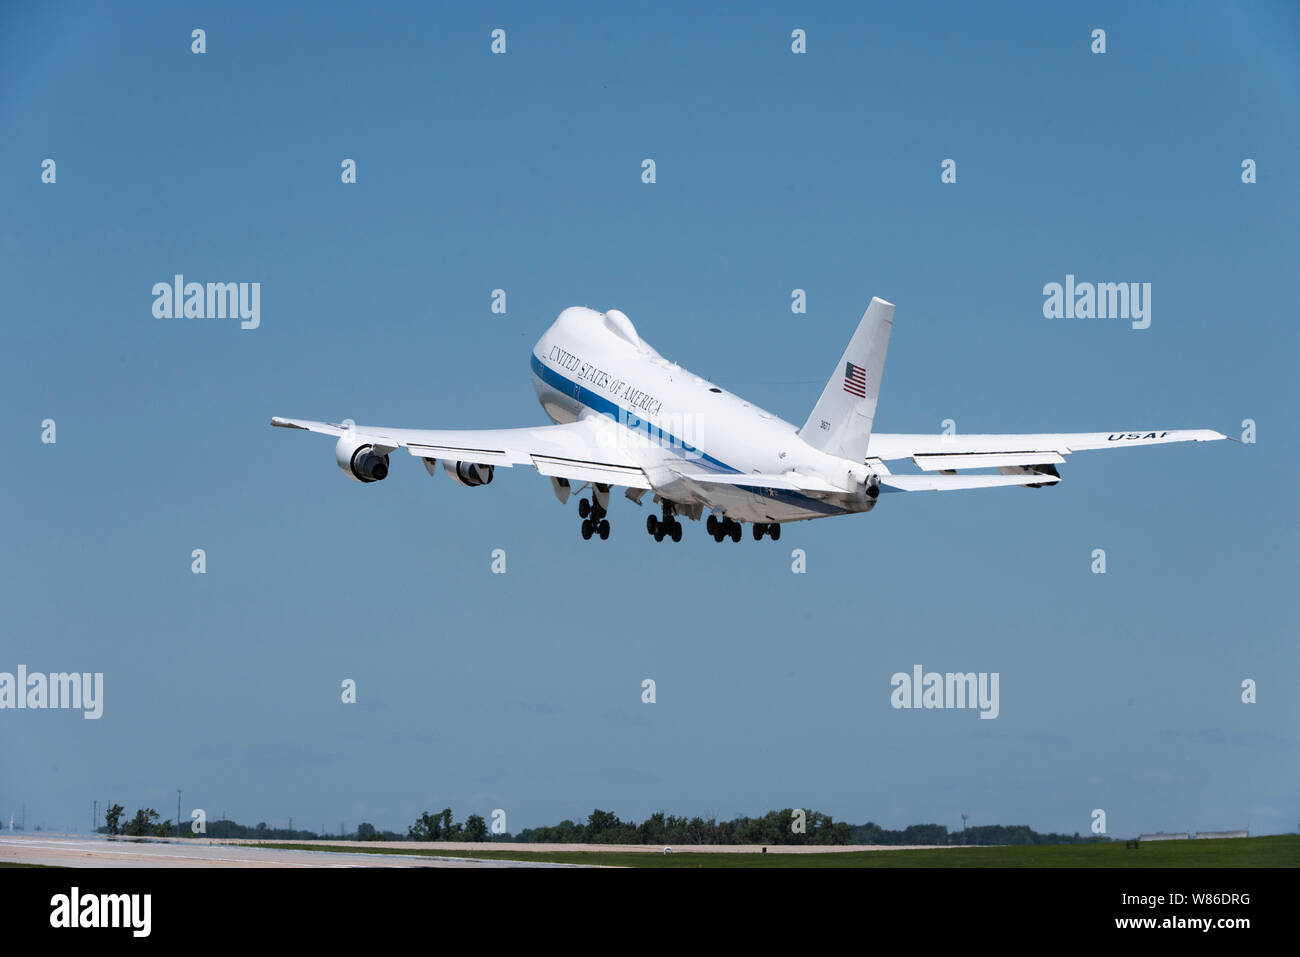 A U.S. Air Force E-4B National Airborne Operations Center aircraft takes off from Offutt Air Force Base, Nebraska, July 10, 2019. The E-4B is capable of seating more than 100 people including a joint-service team, an Air Force flight crew, maintenance and security components, a communications team and selected augmentees. (U.S. Air Force photo by Staff Sgt. Jacob Skovo) Stock Photo